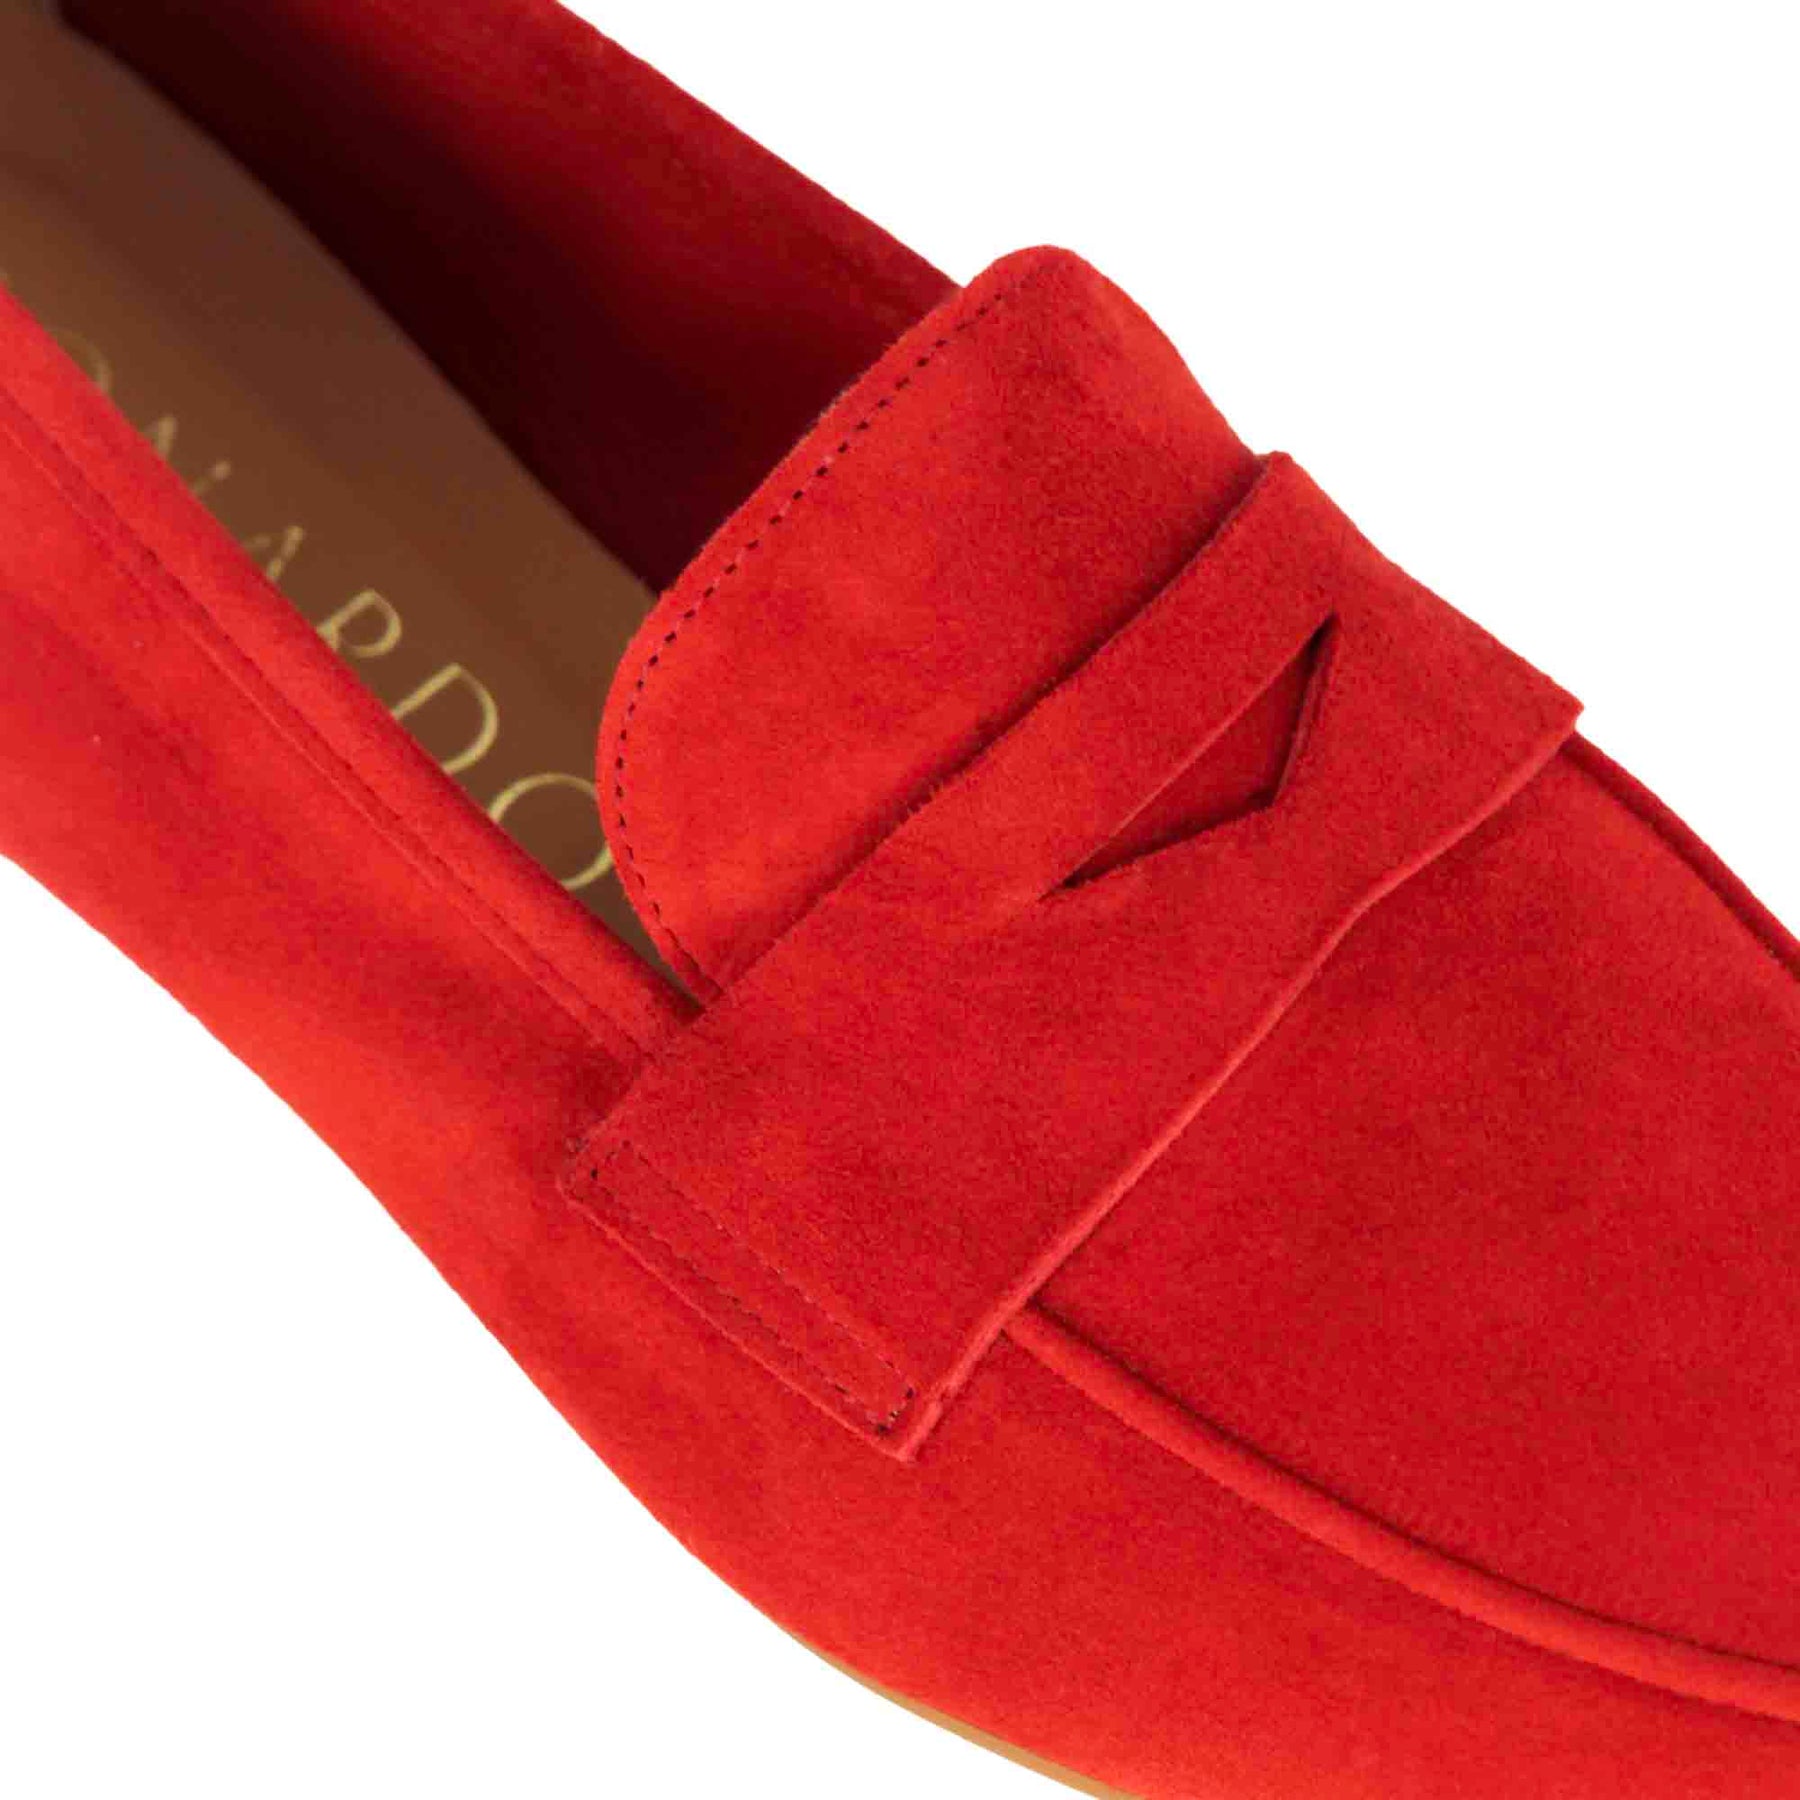 Classic women's moccasin in red suede